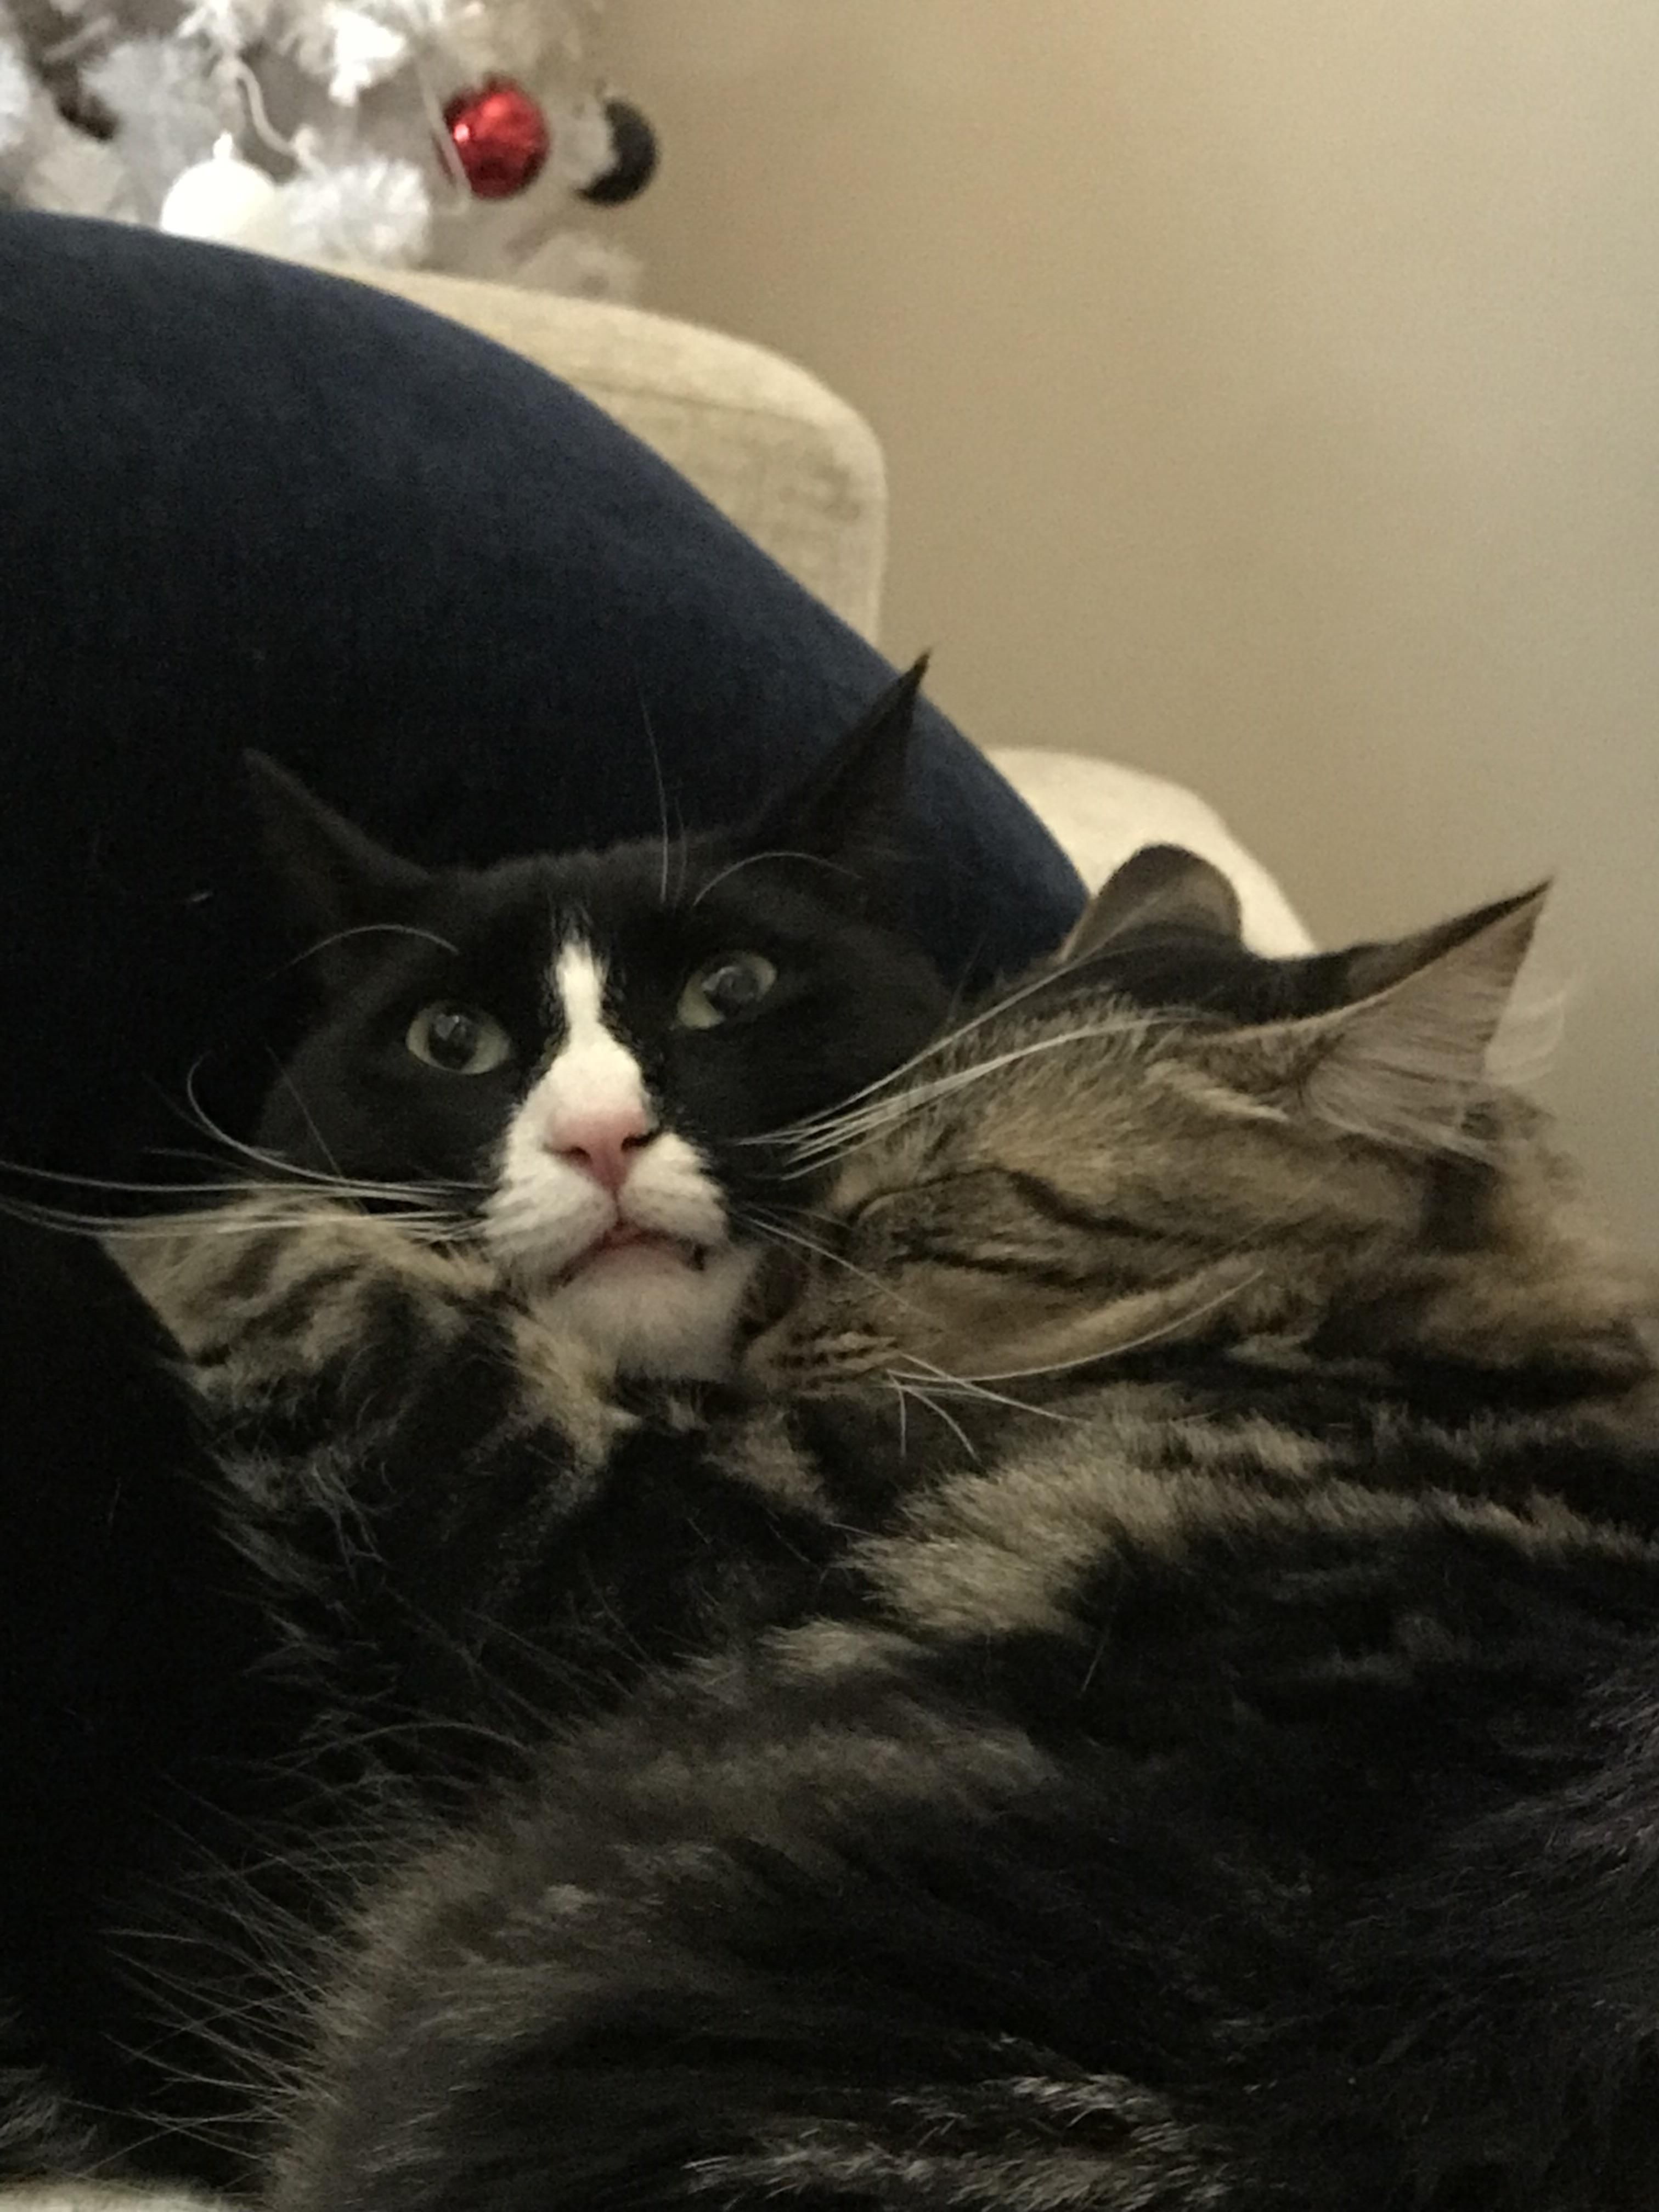 My wife’s cat likes to cuddle but I don’t think my cat does.